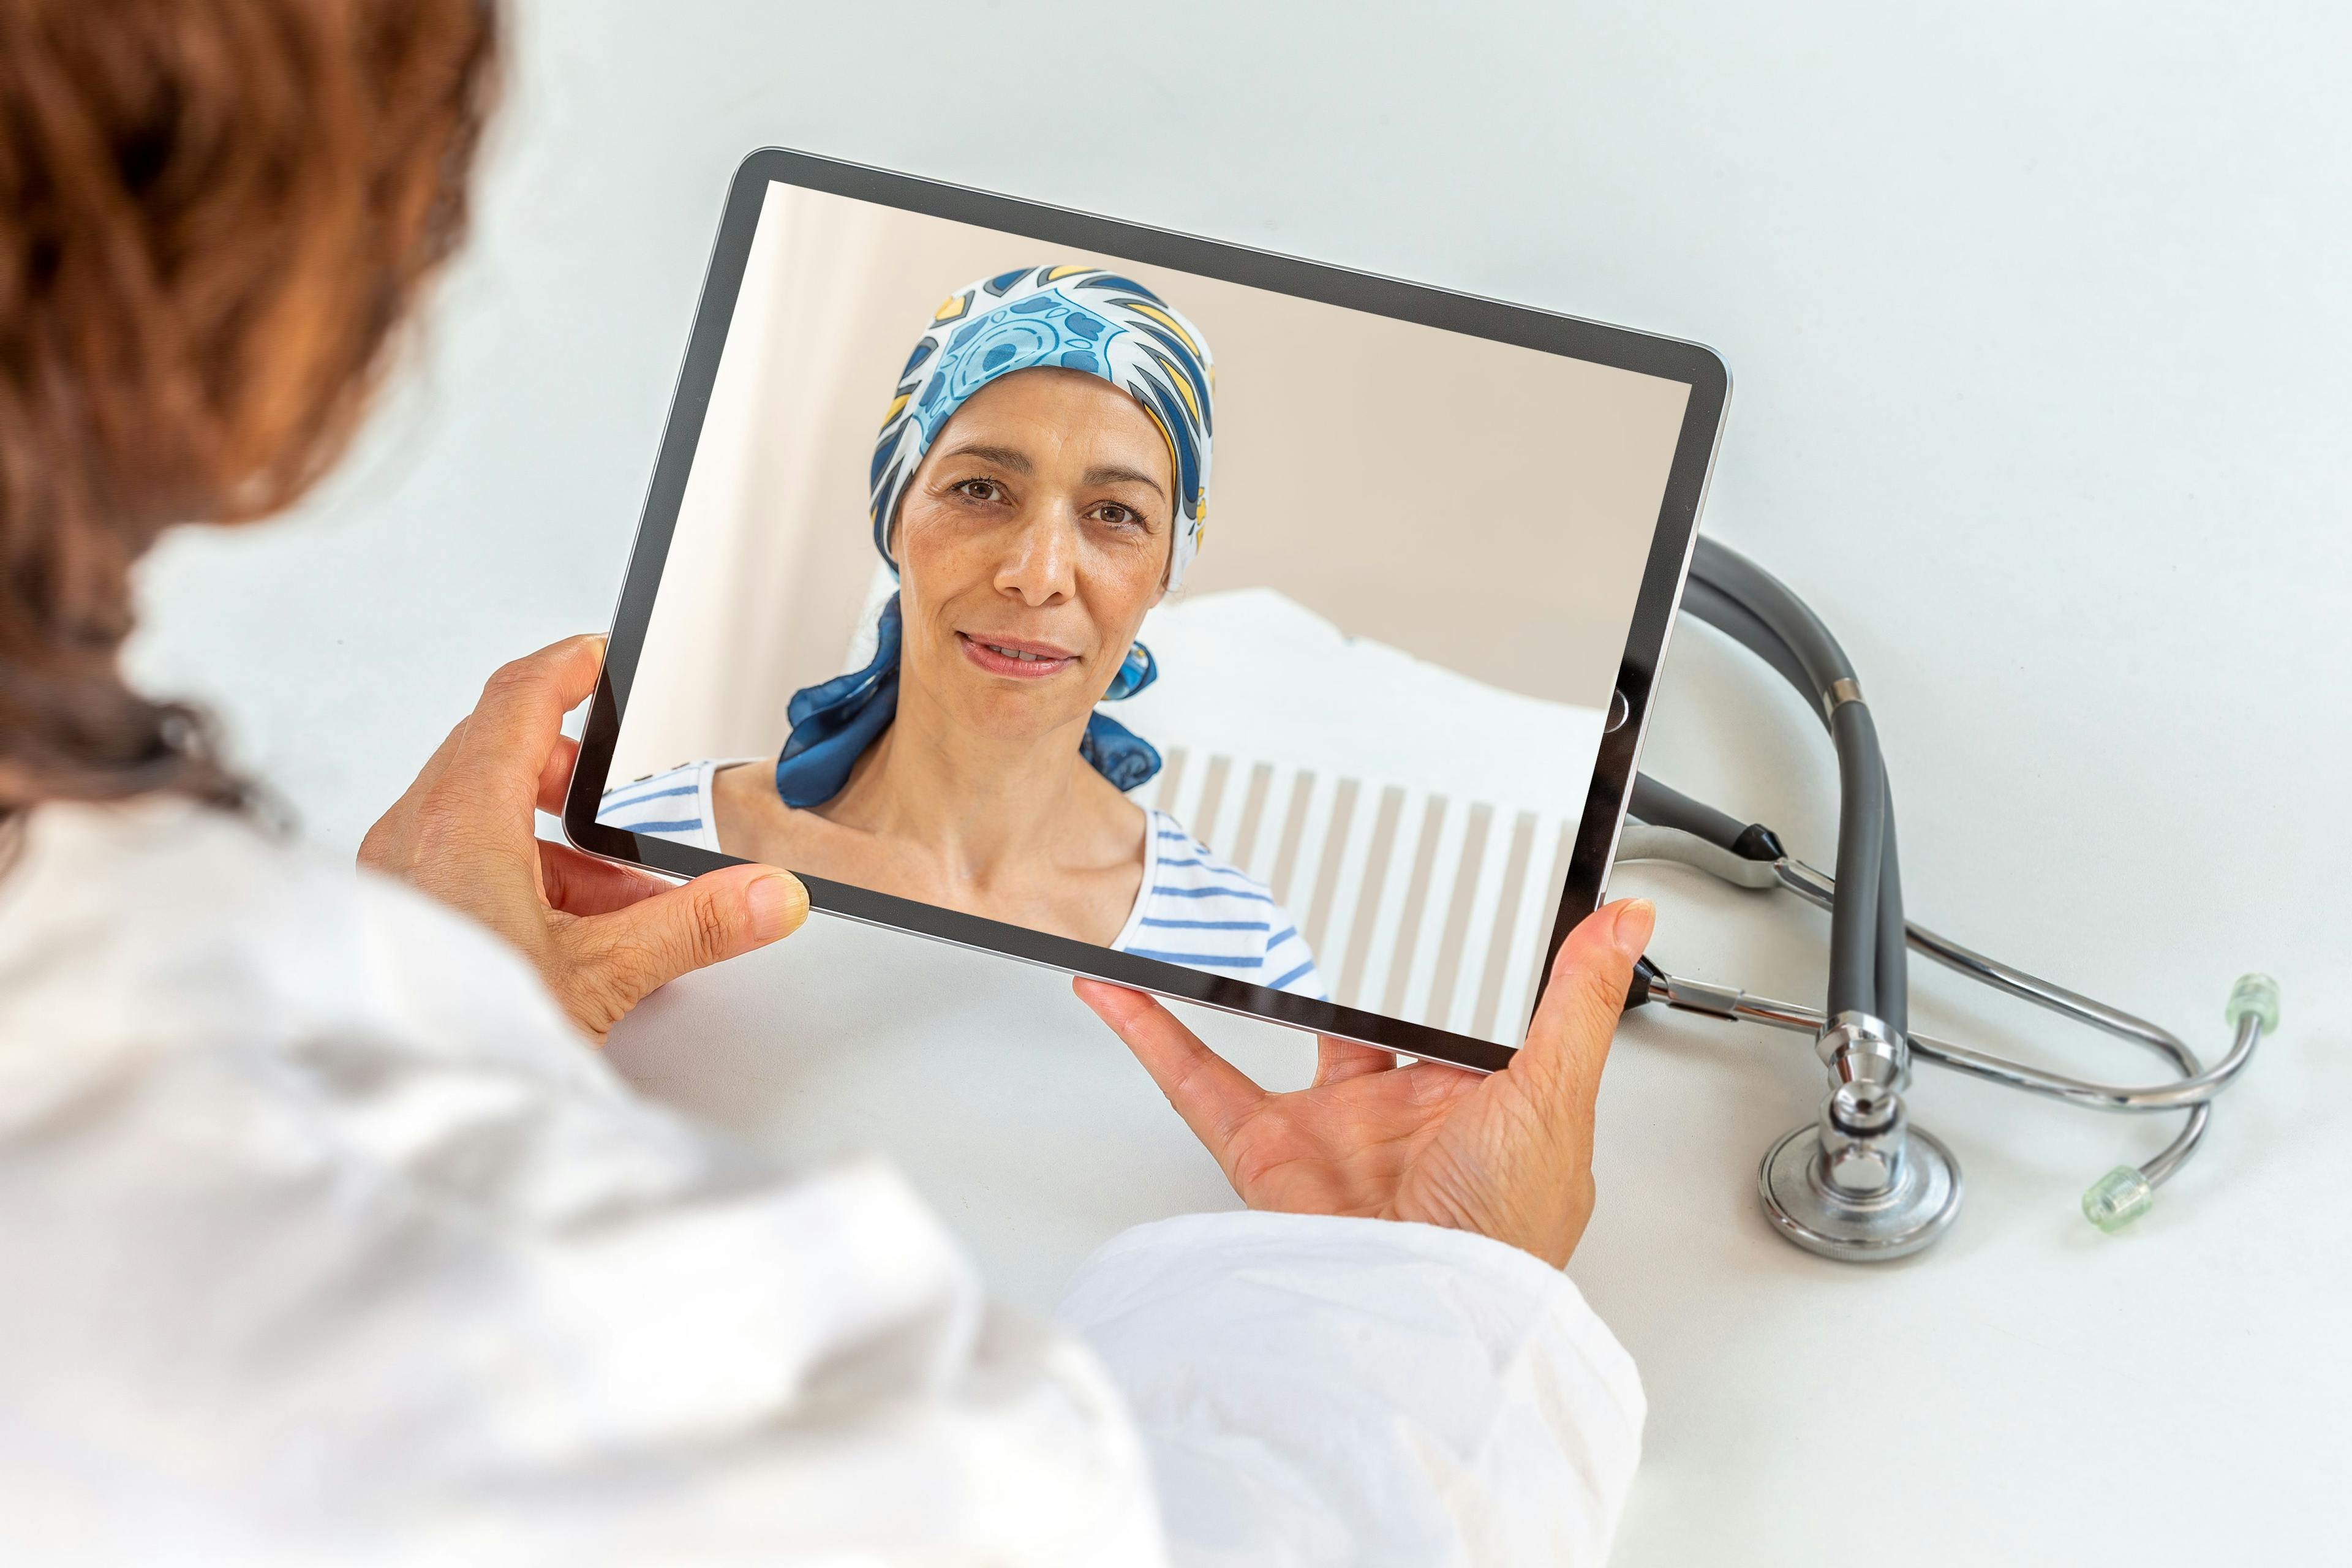 Many Patients With Cancer Consider Telemedicine Appointments Just as Effective as In-Office Visits